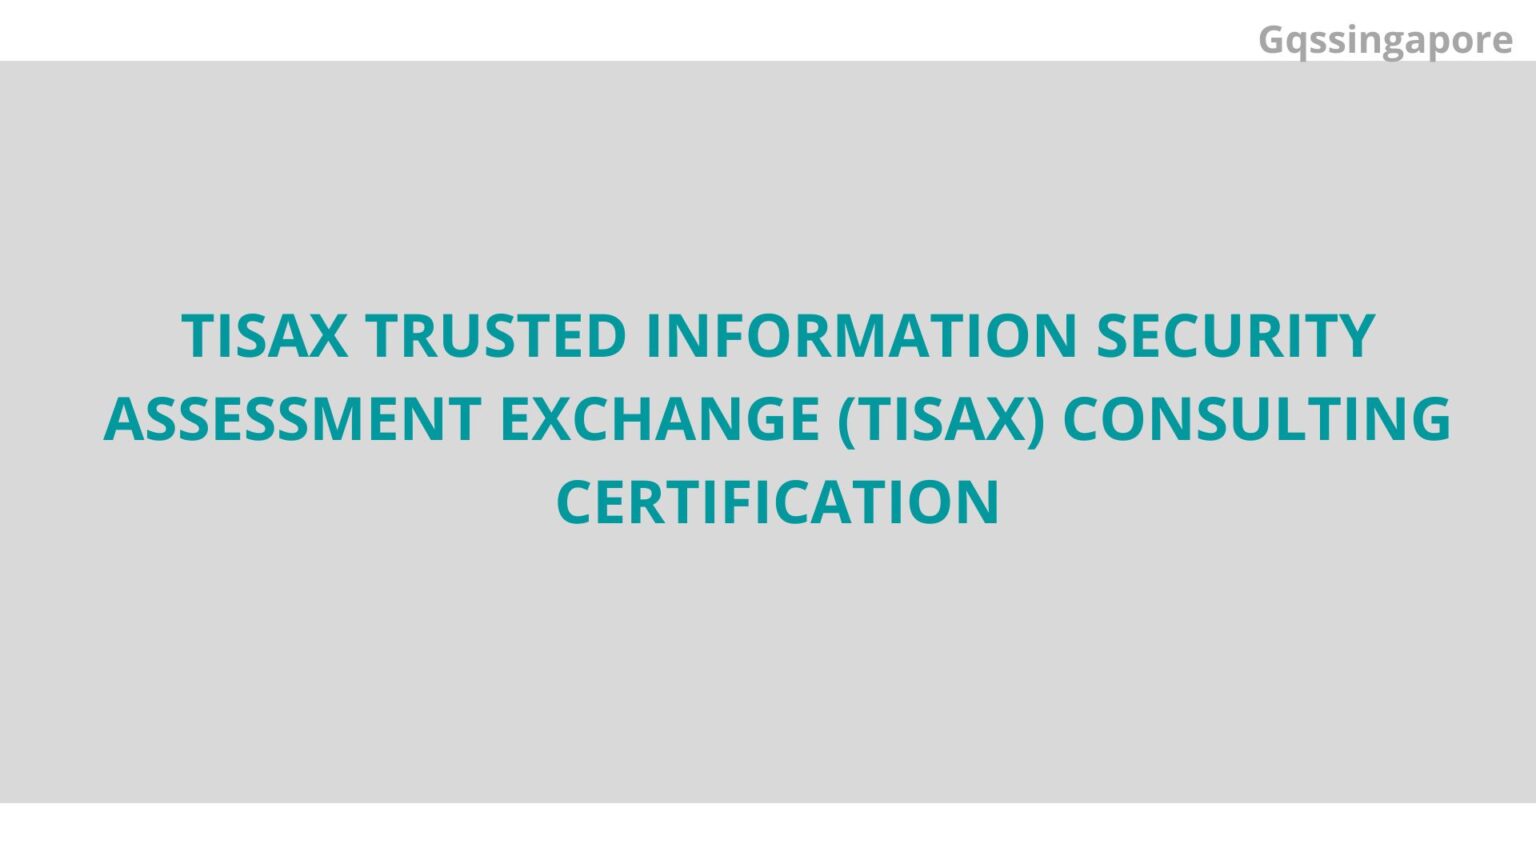 TISAX Trusted Information Security Assessment Exchange (TISAX